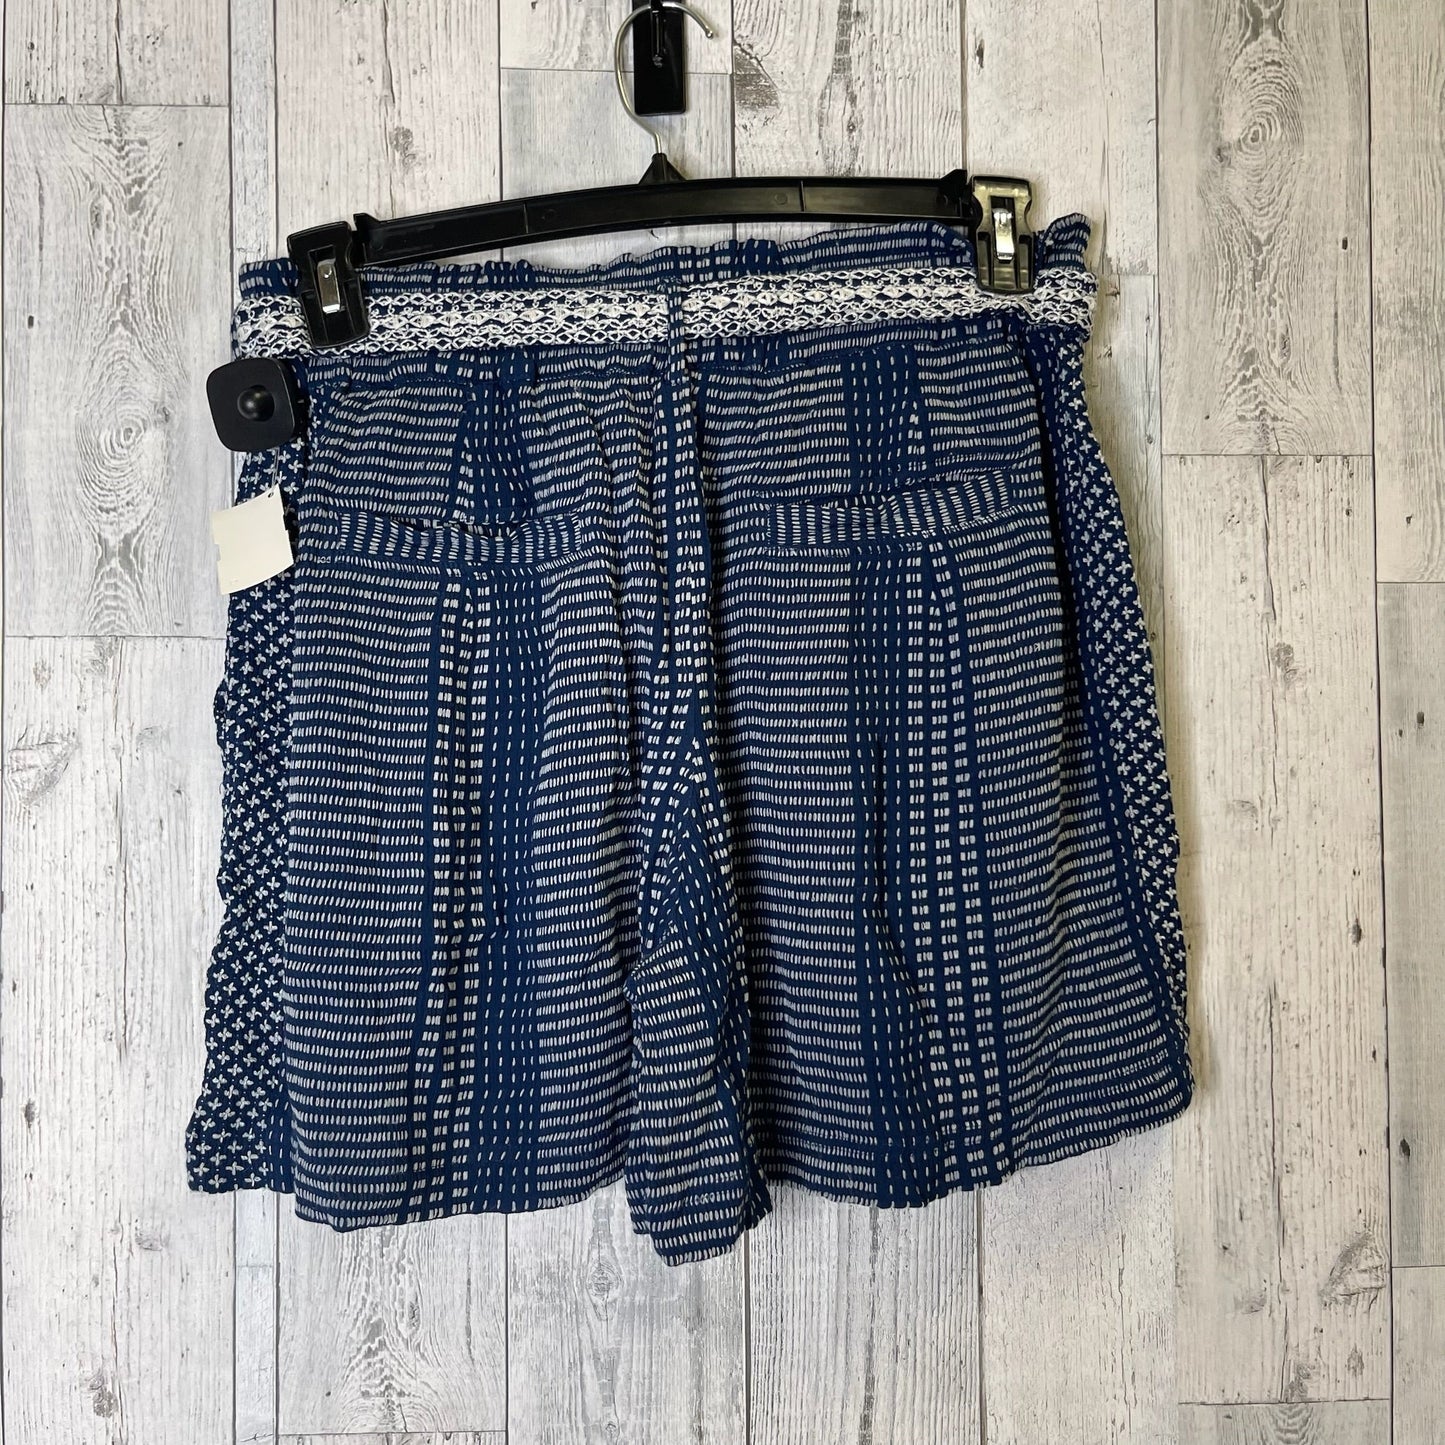 Shorts By Anthropologie  Size: S